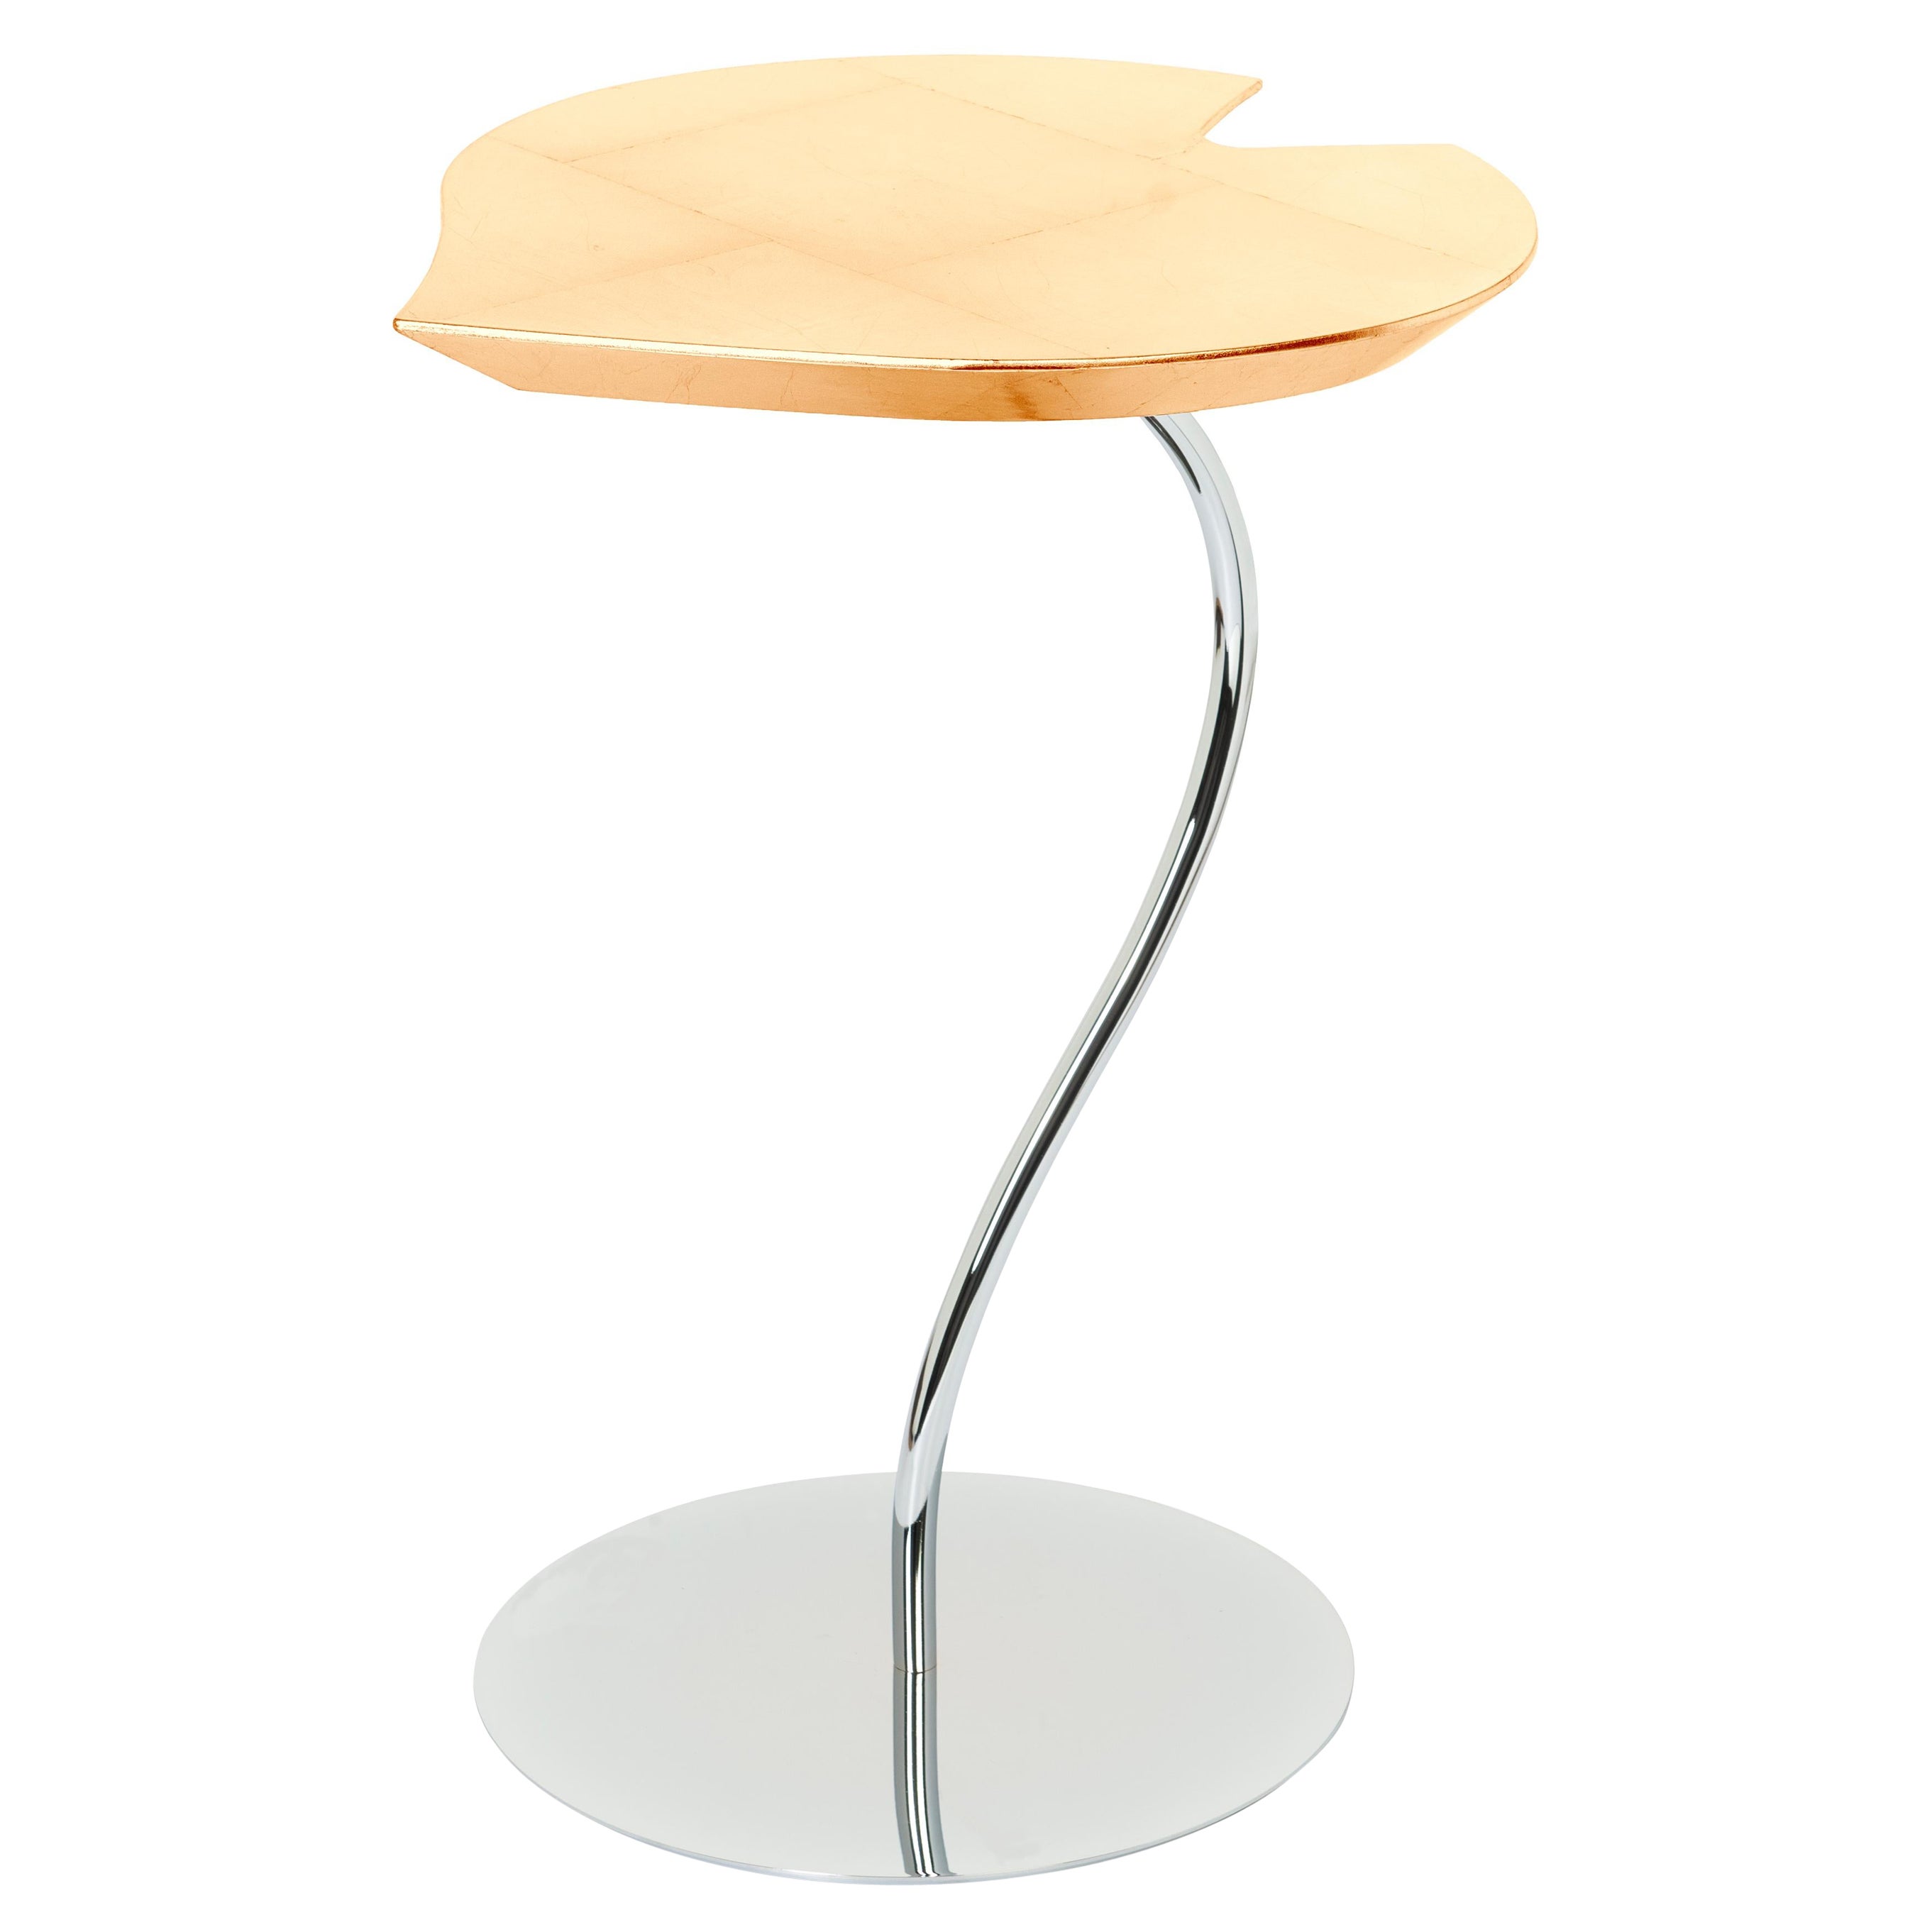 Small Table Leaf Wood, Golden Leaf Top, Base in Metal Chrome Finish, Italy For Sale